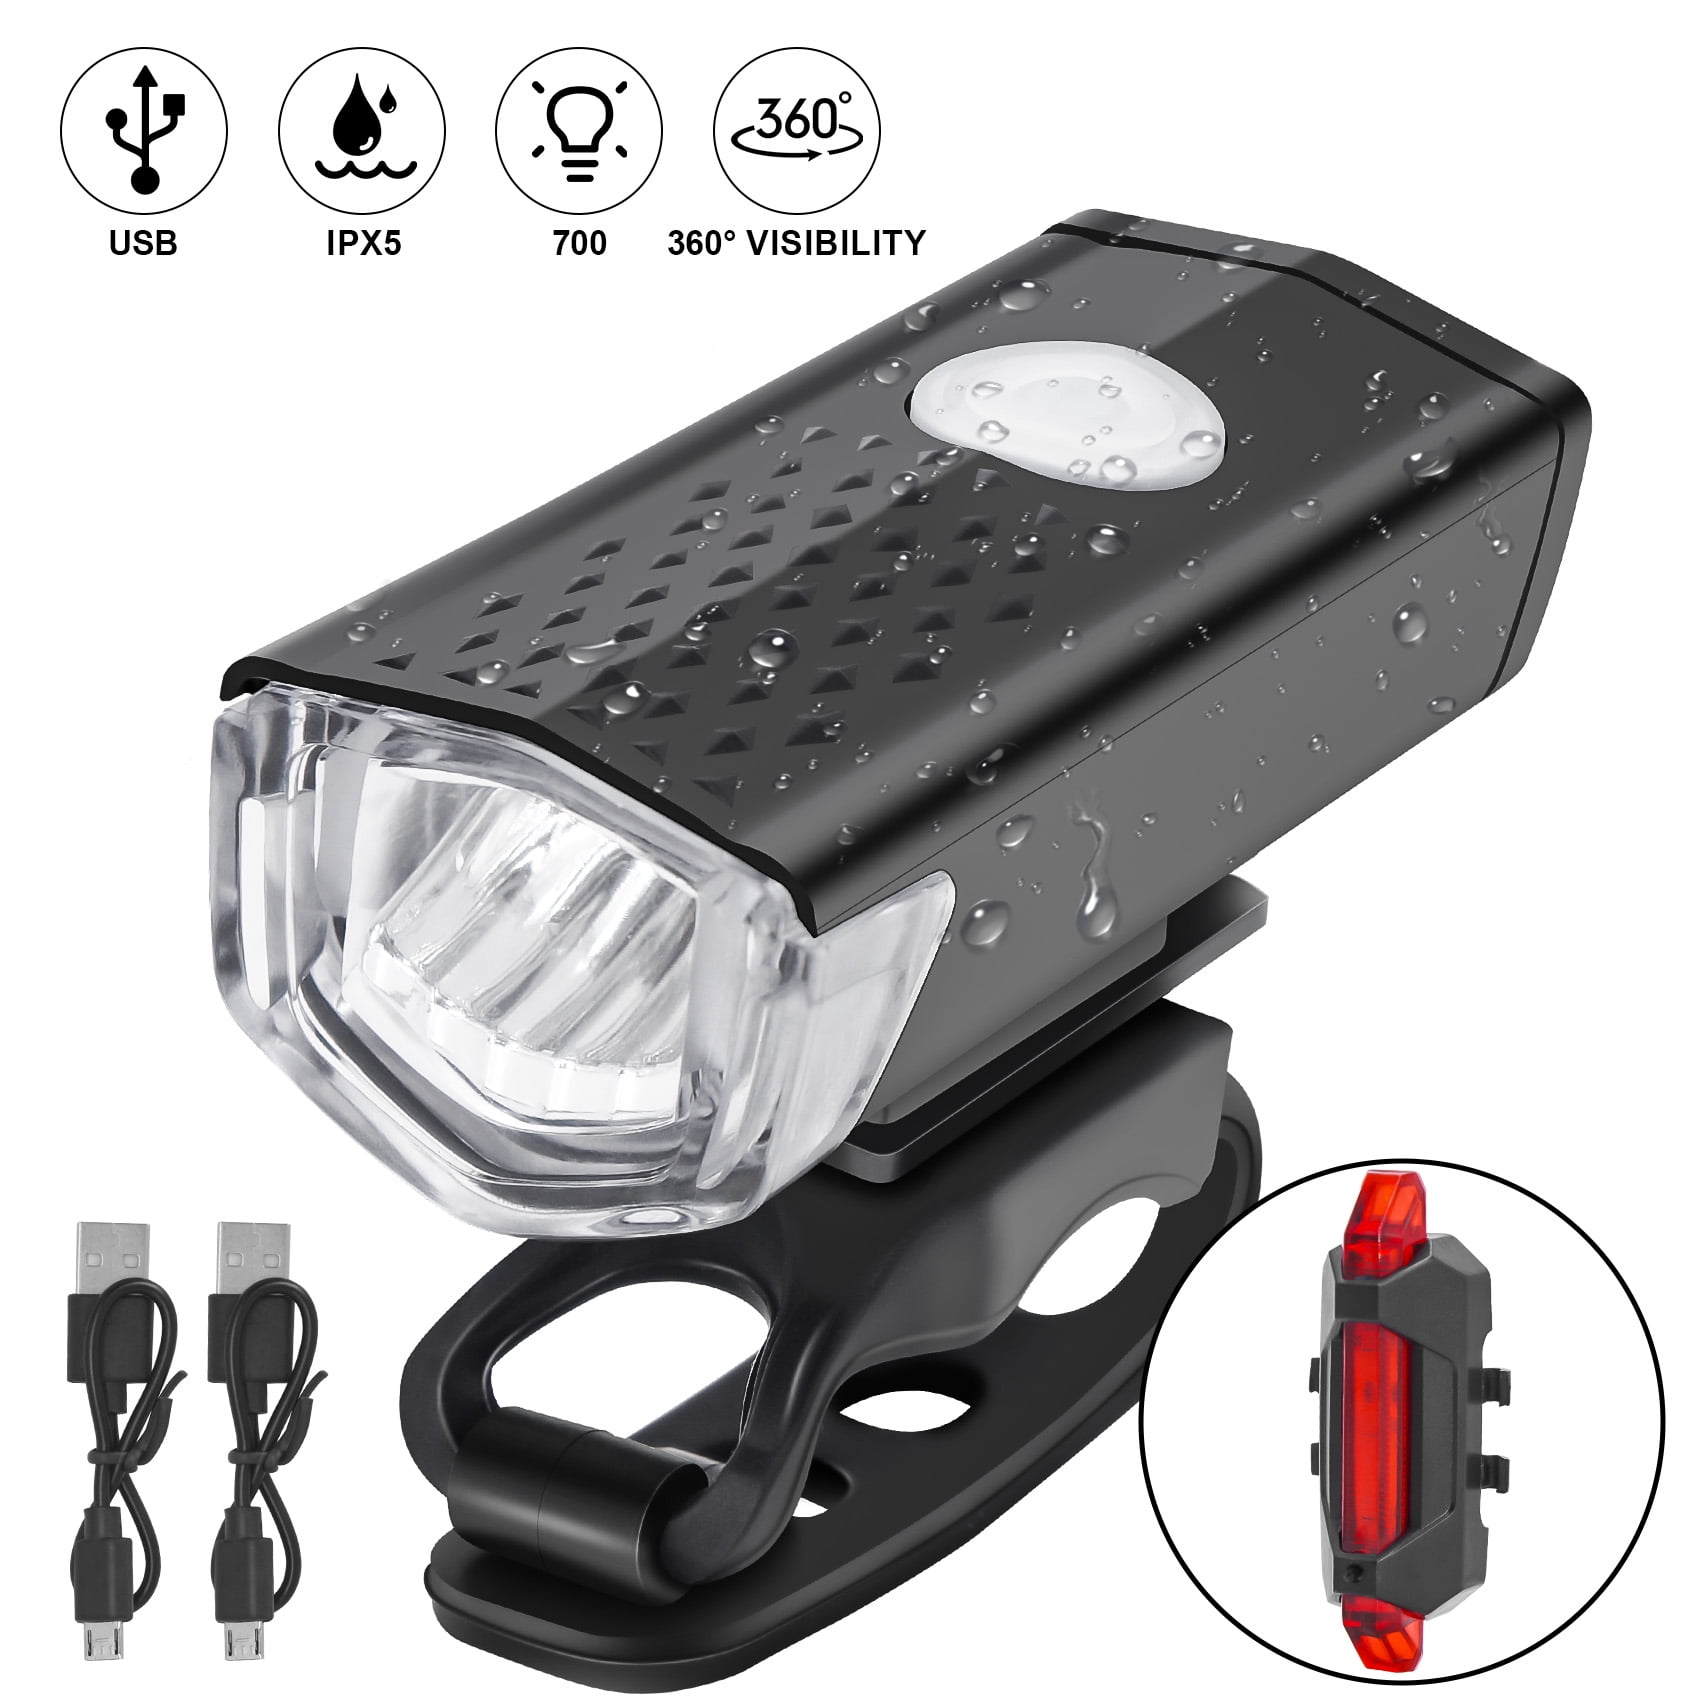 YOLETO Bike Lights, Super Bright Bicycle Headlight and Back Taillight with 3 Modes for Men Women Kids Road Mountain Cycling - Walmart.com